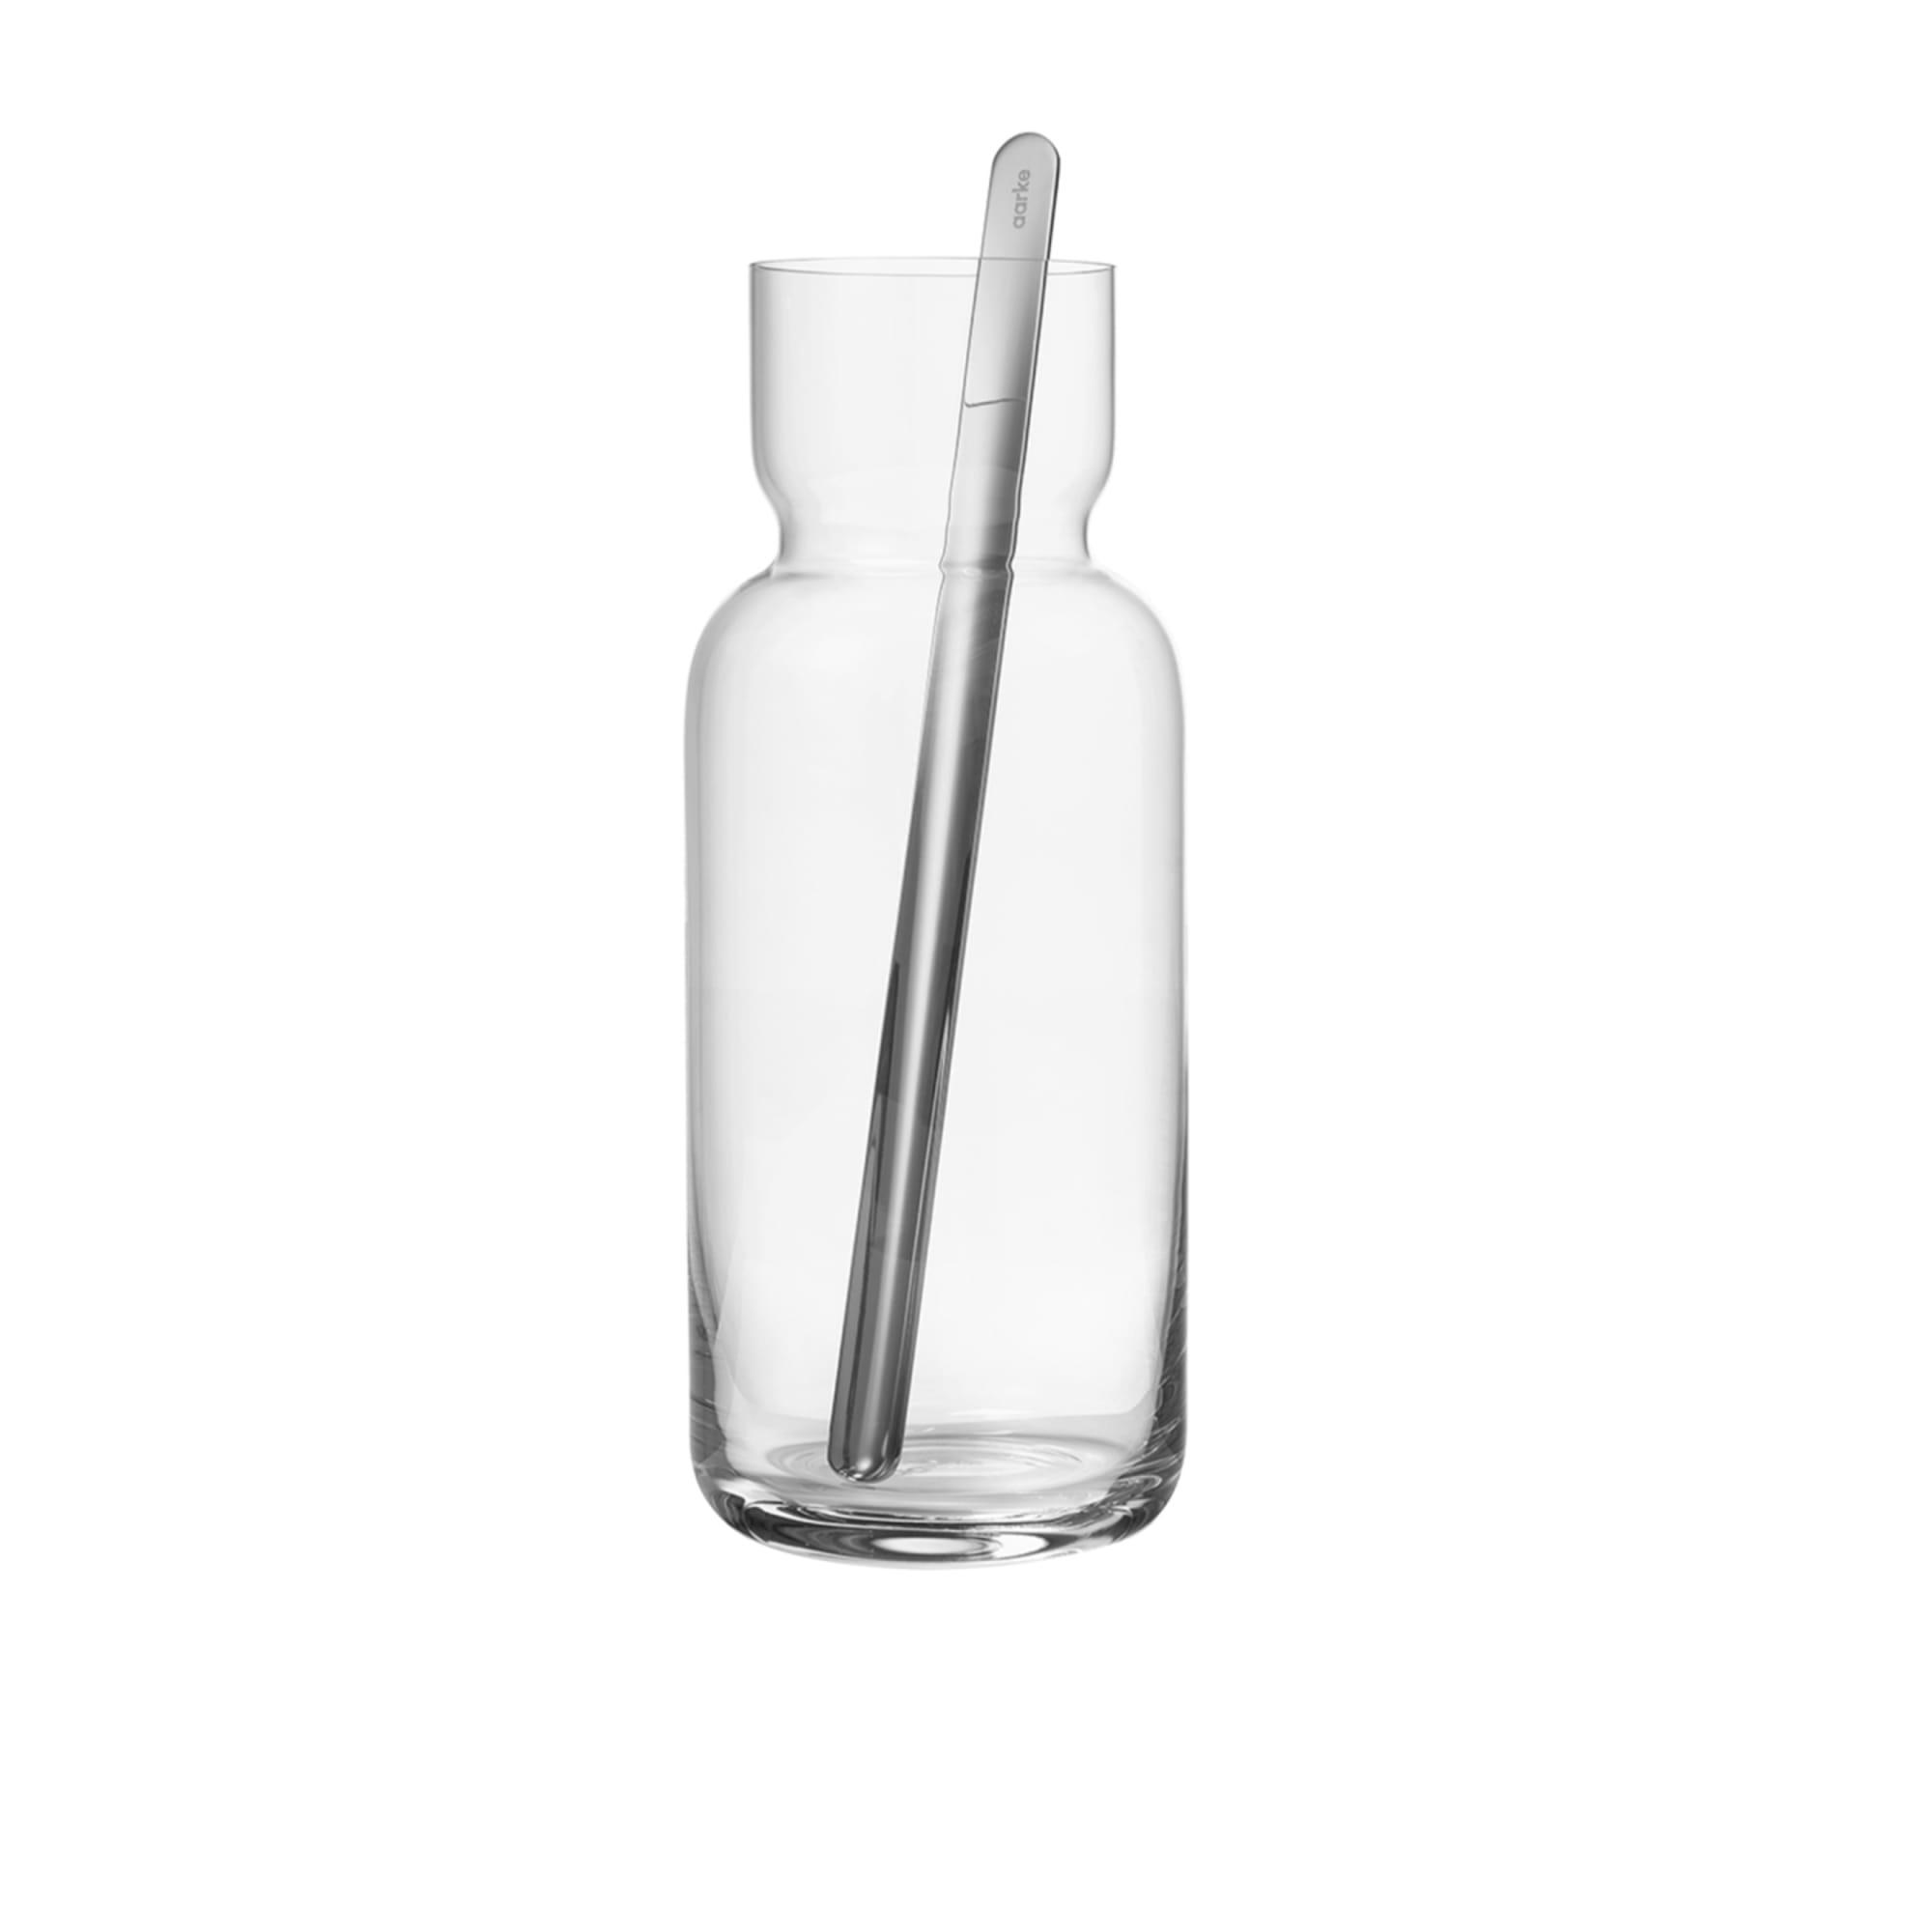 Aarke Nesting Carafe and Mixing Spoon 1.1L Image 1